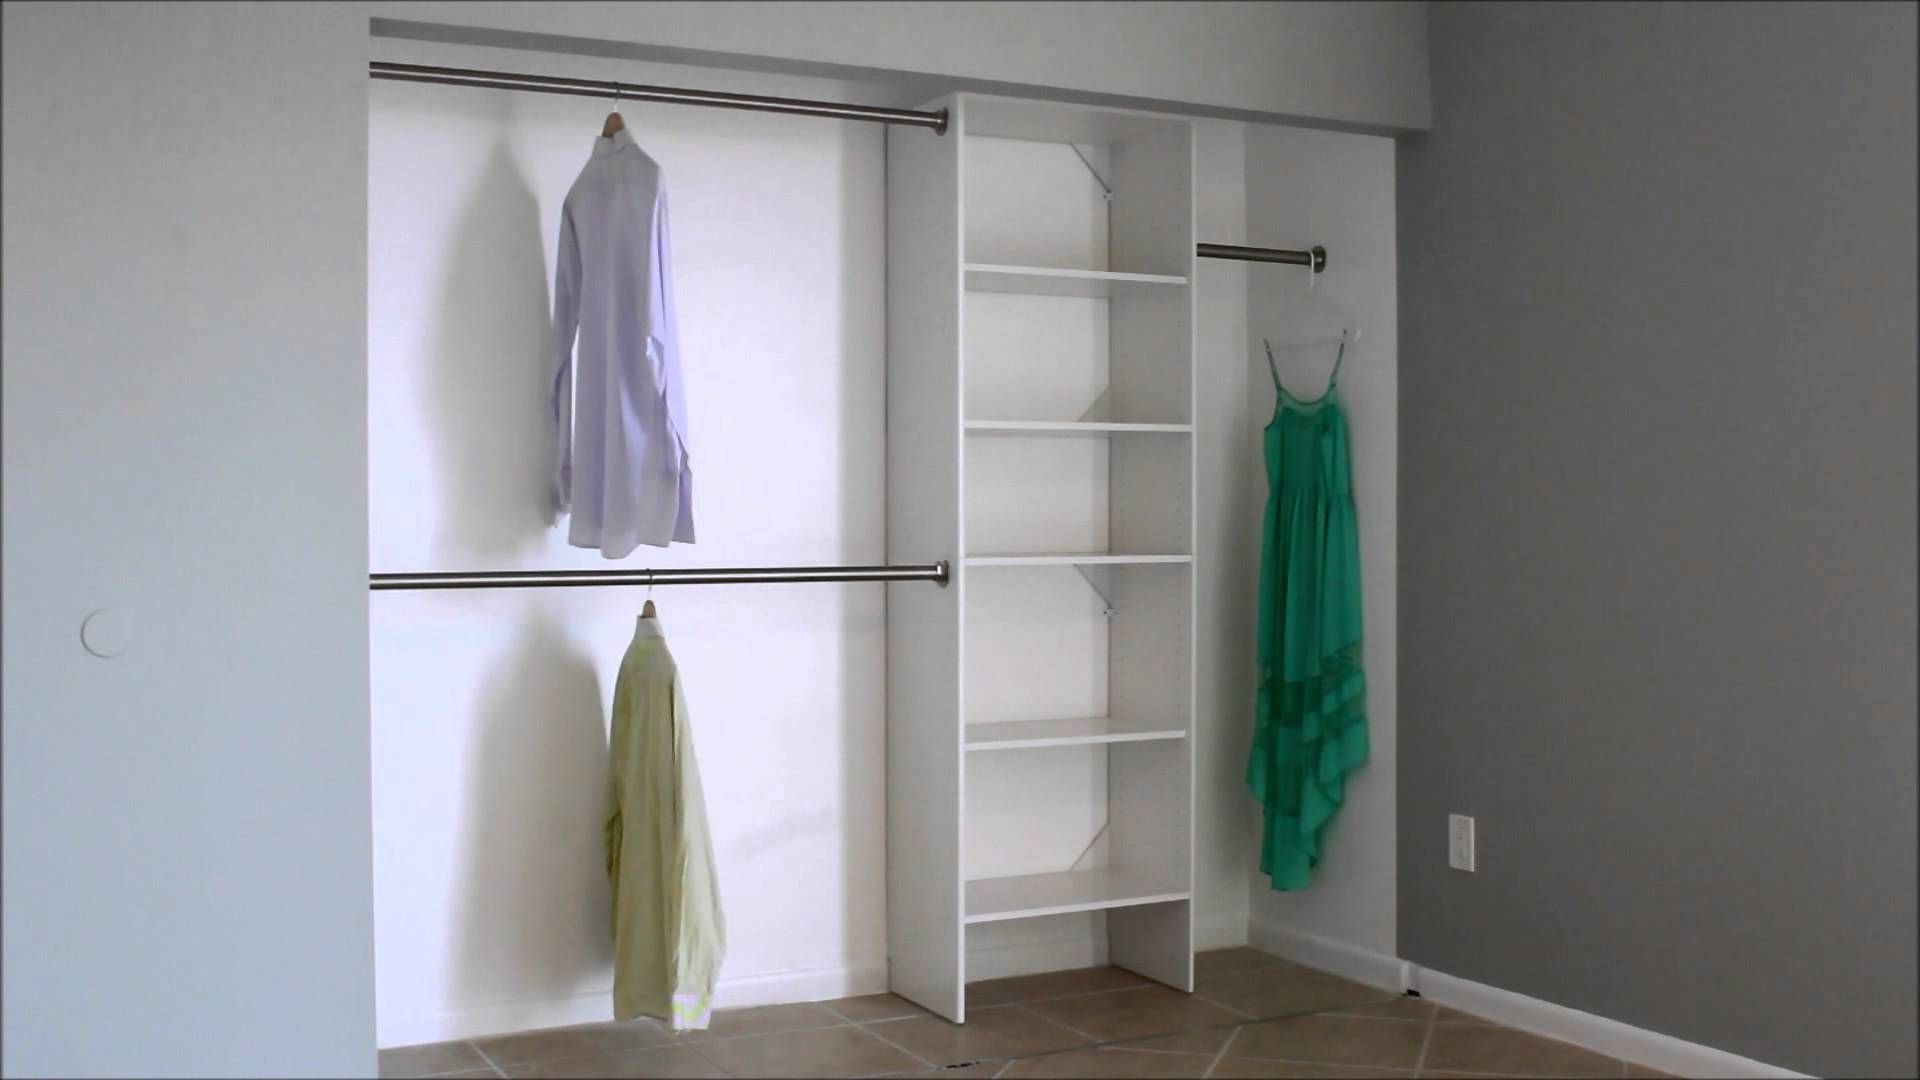 Double Rod Closet Height | Standard Closet Rod Height | Closet Rod Height,  Closet Rod, Closet Bedroom With Tall Double Hanging Rail Wardrobes (View 6 of 20)